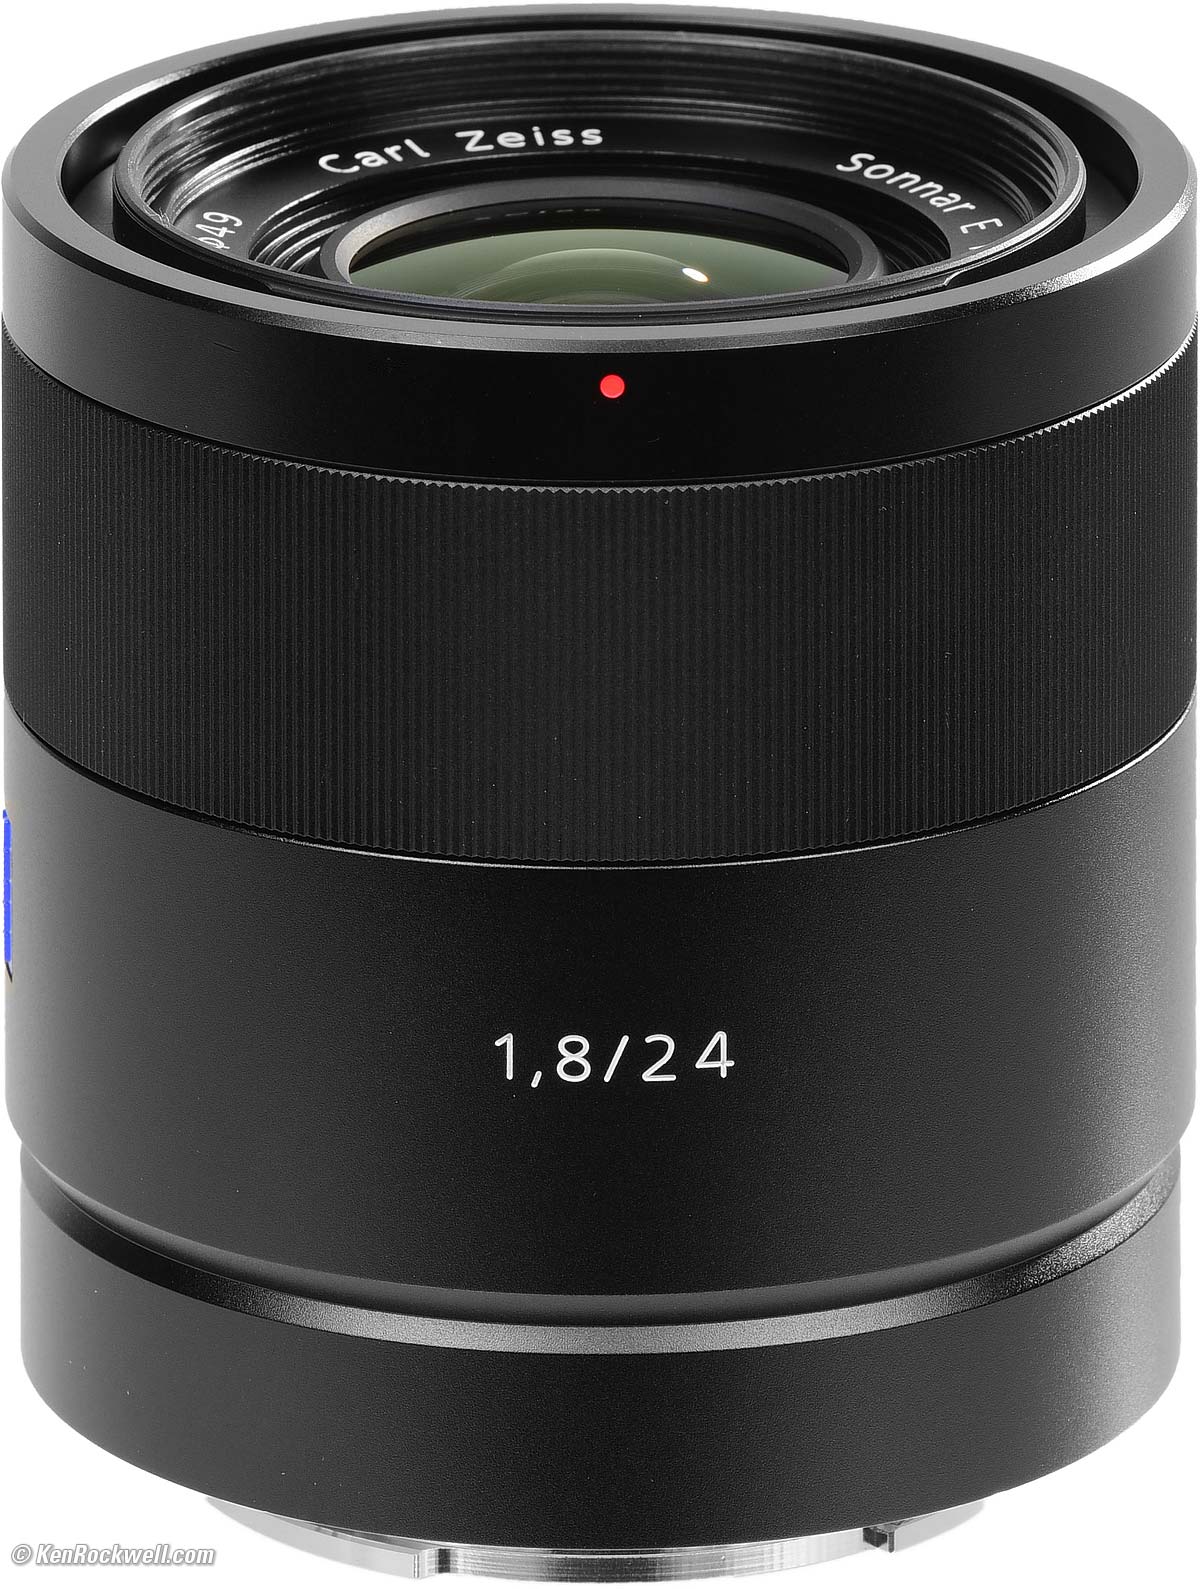 Sony Zeiss 24mm f/1.8 Review